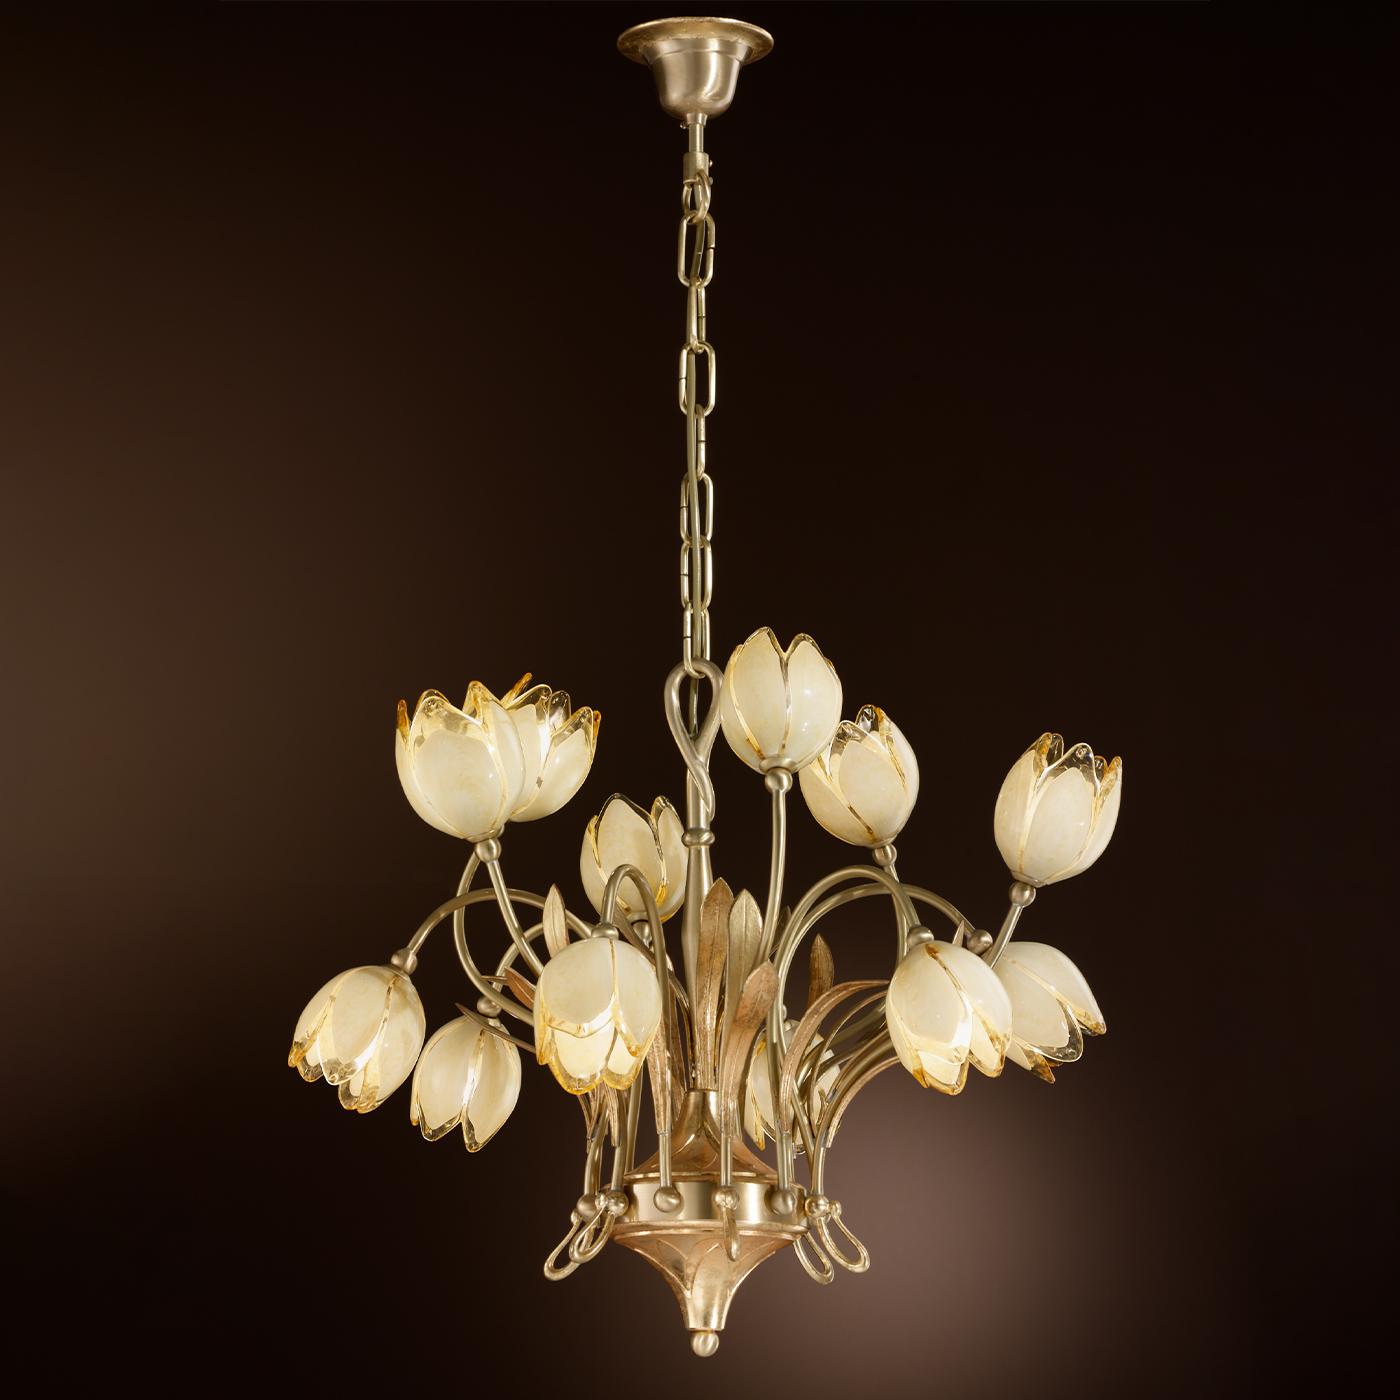 Feminine and graceful, this superb golden brass chandelier recalls a generous bouquet of tulips in bloom. Fluidly extending from the central body, stem-like arms sustain mouth-blown amber glass shades shaped like buds where the lightbulbs are